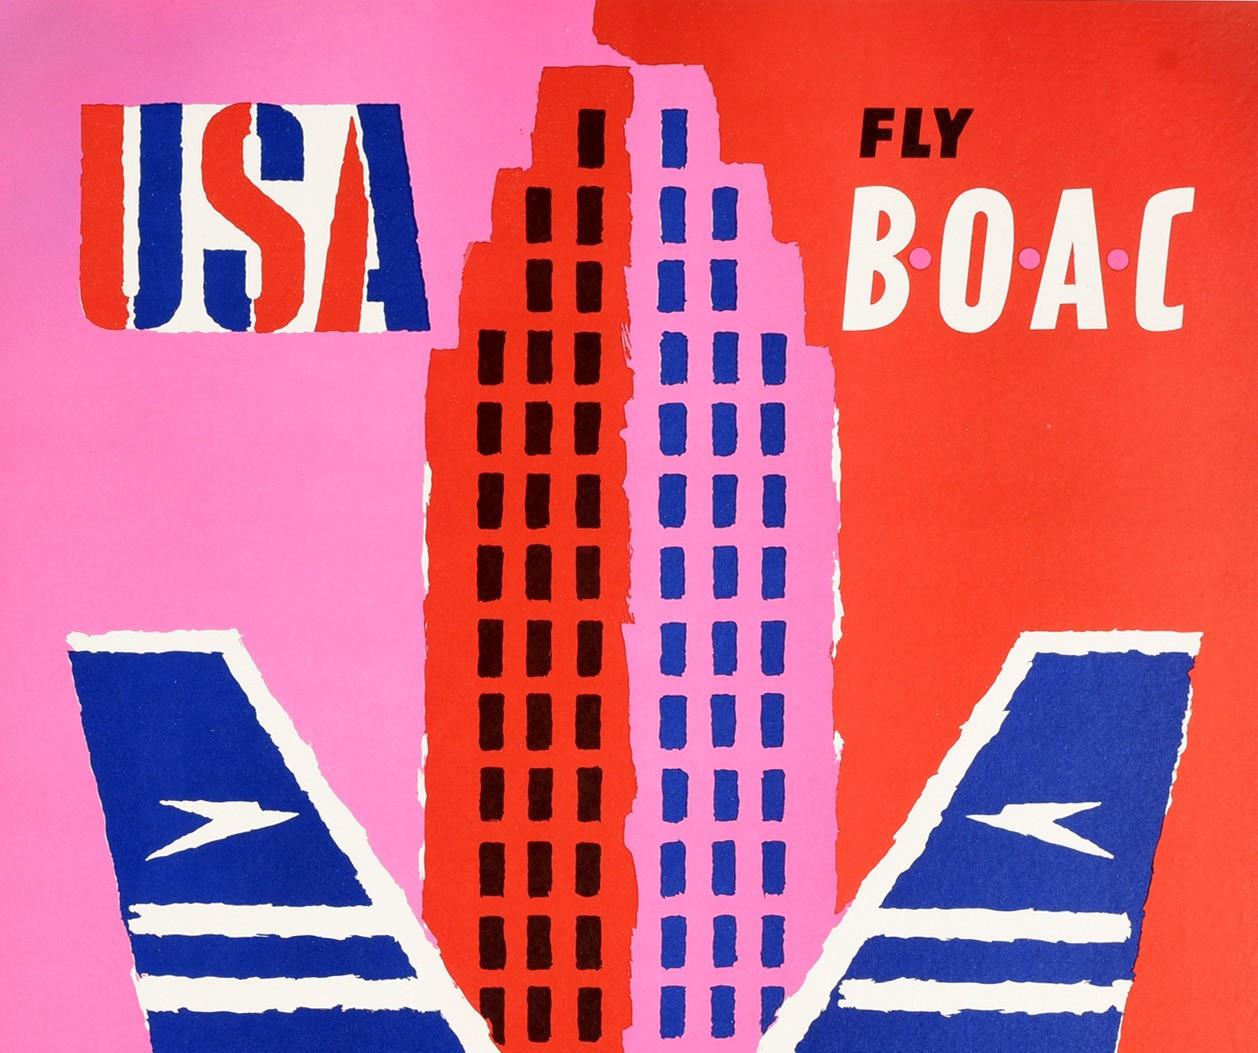 Original Vintage Poster USA Fly BOAC Airline Travel America Midcentury Design - Print by Abram Games